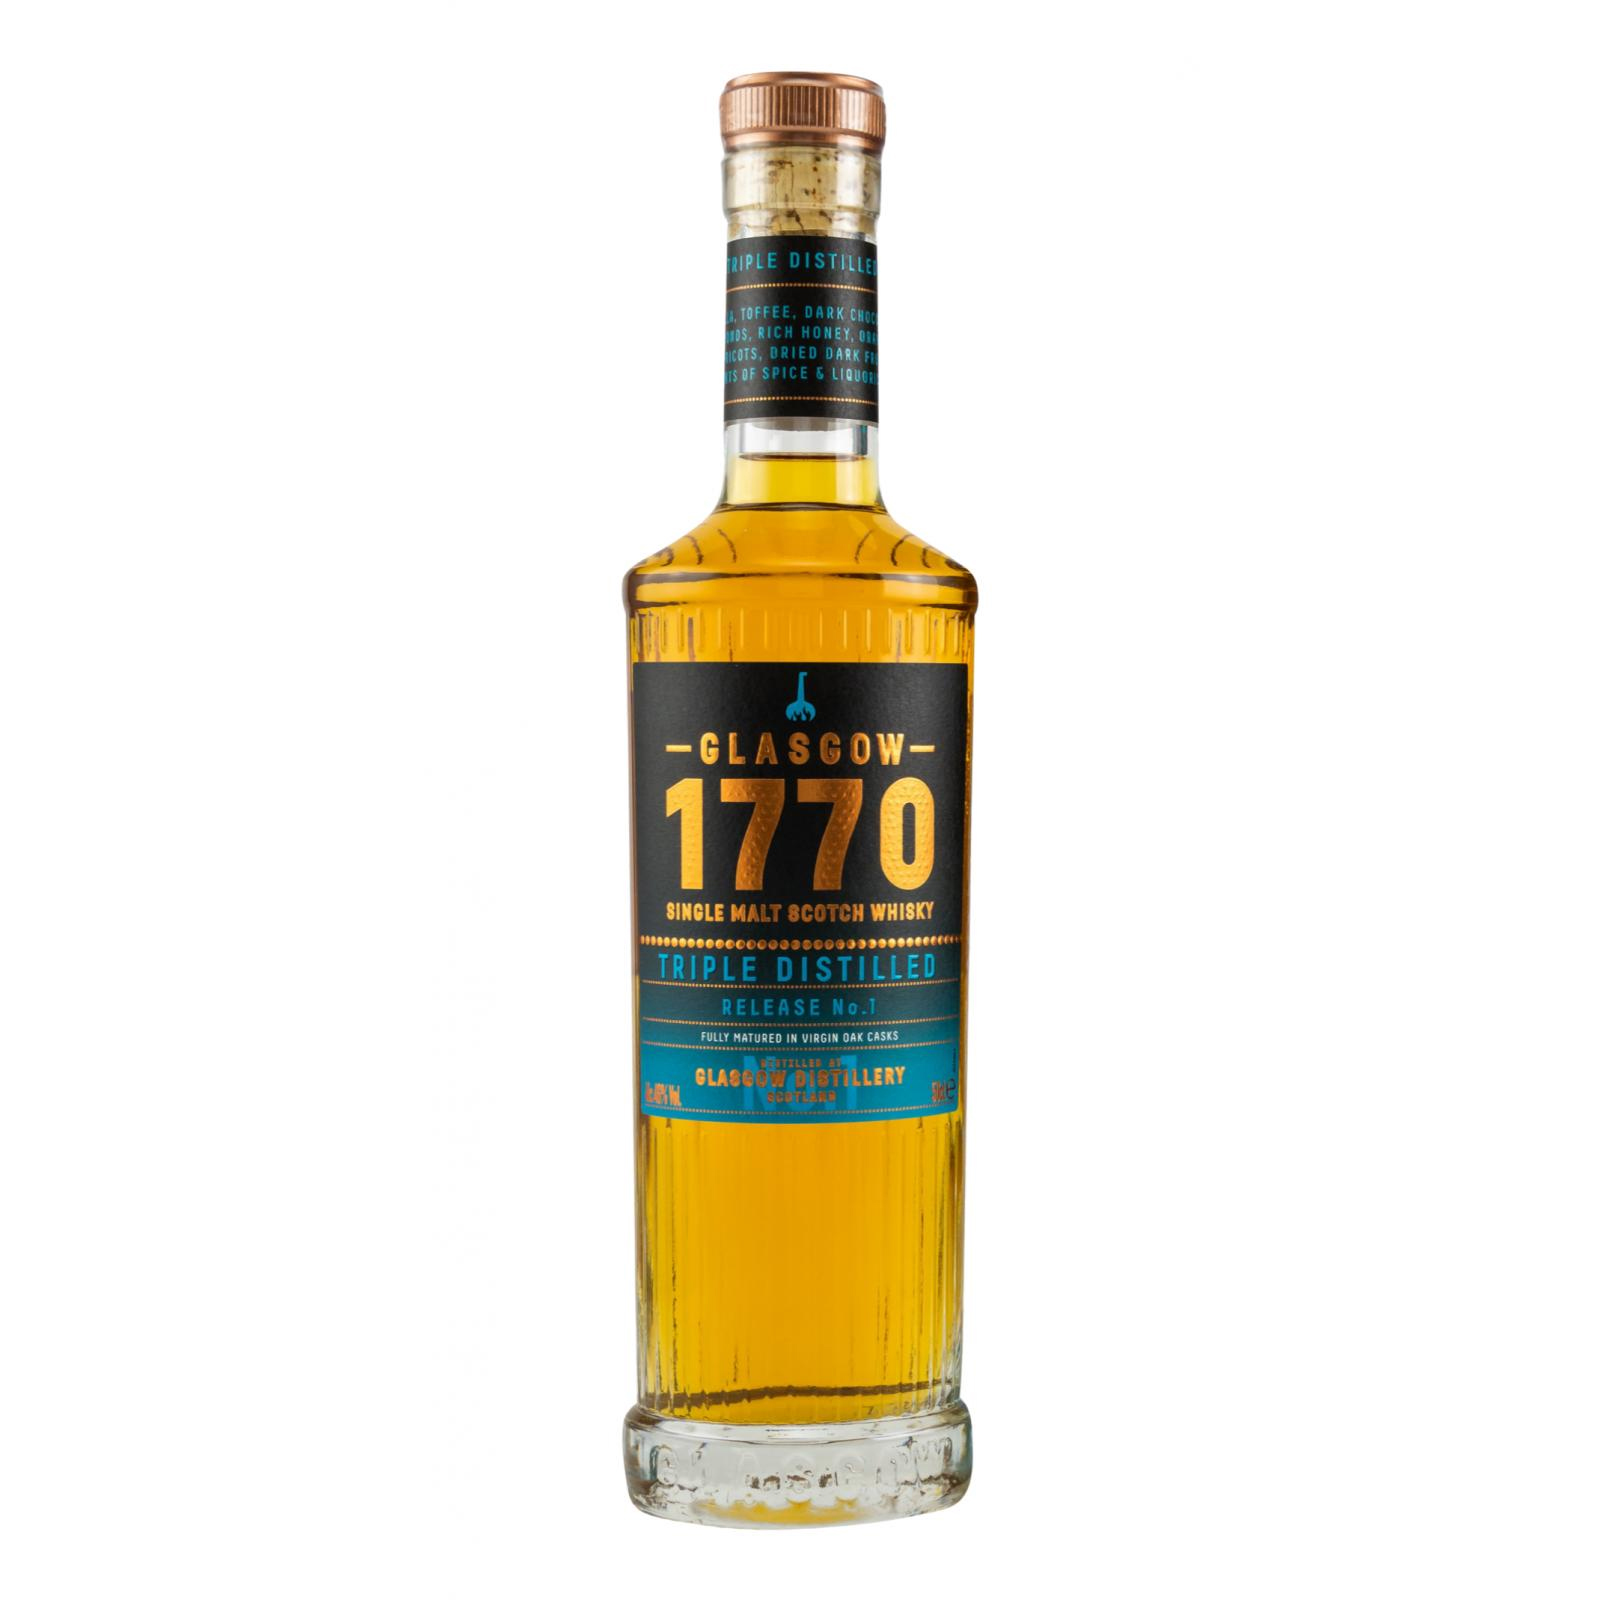 You are currently viewing Glasgow “1770” – Virgin Oak